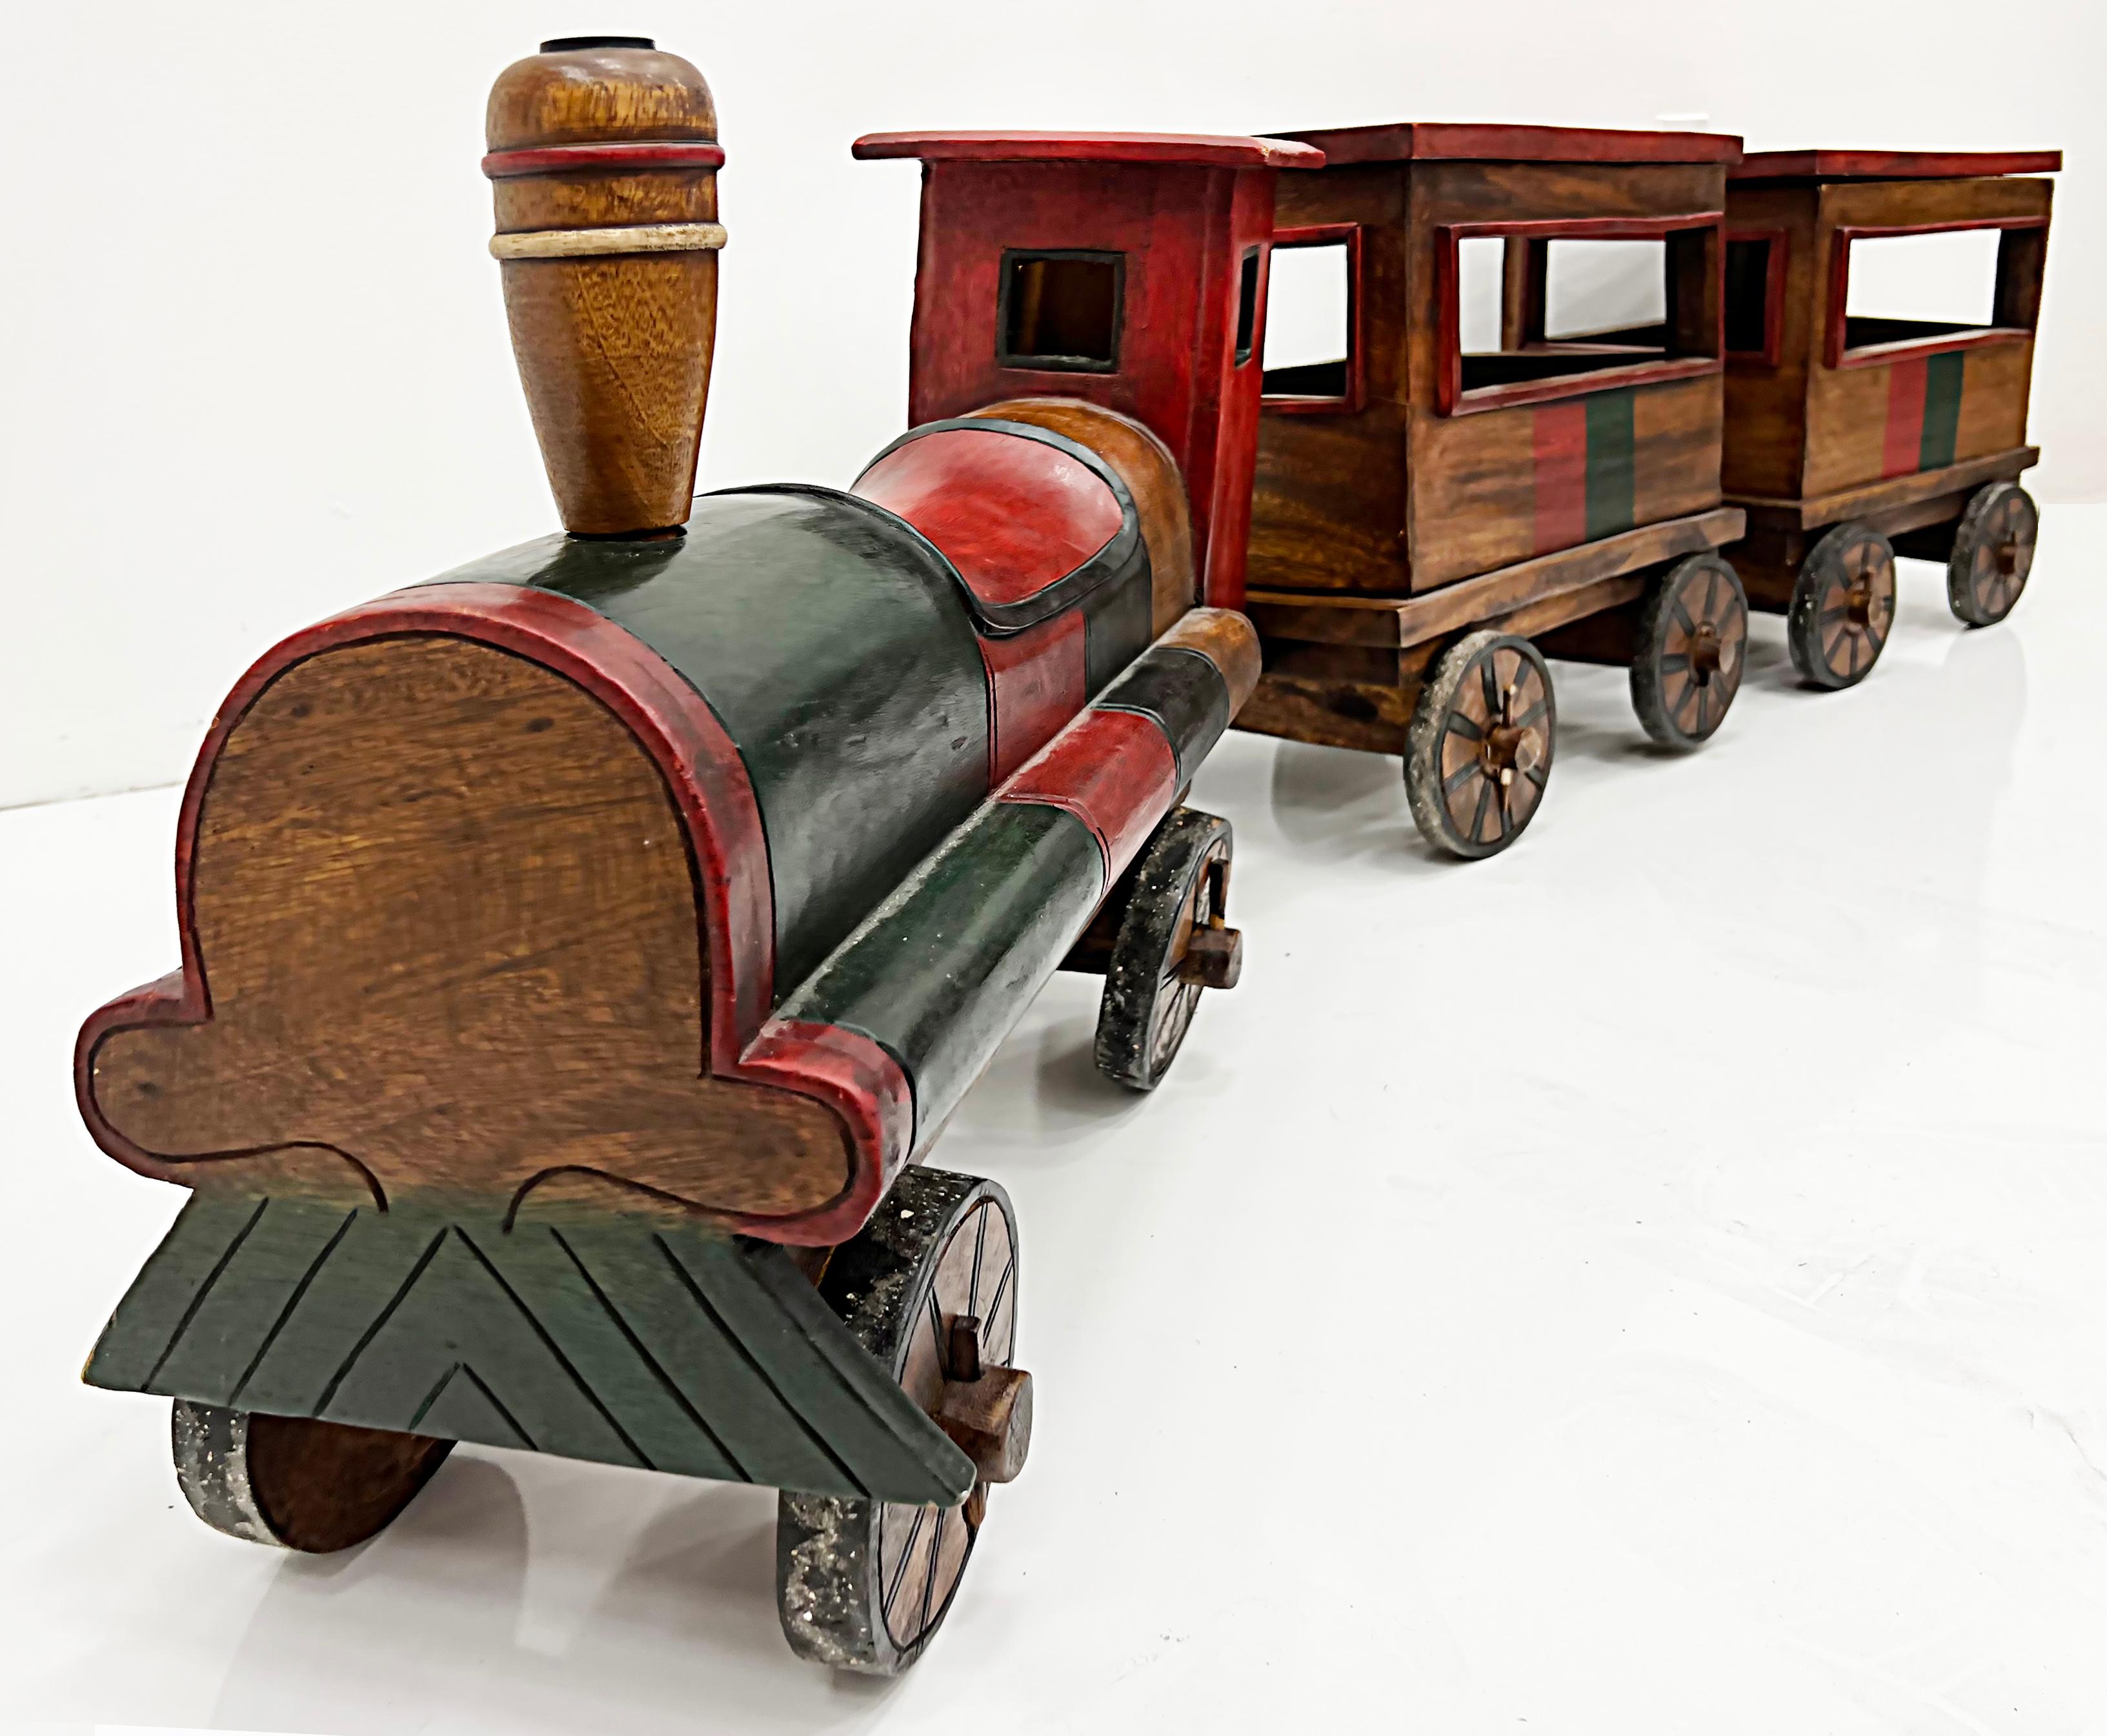 Overscale vintage carved wood Folk Art Toy train set

Offered for sale is an overscale vintage carved wood folk art toy train set. The set includes 3 separate pieces including the engine and 2 cars that have a great vintage patina. These would